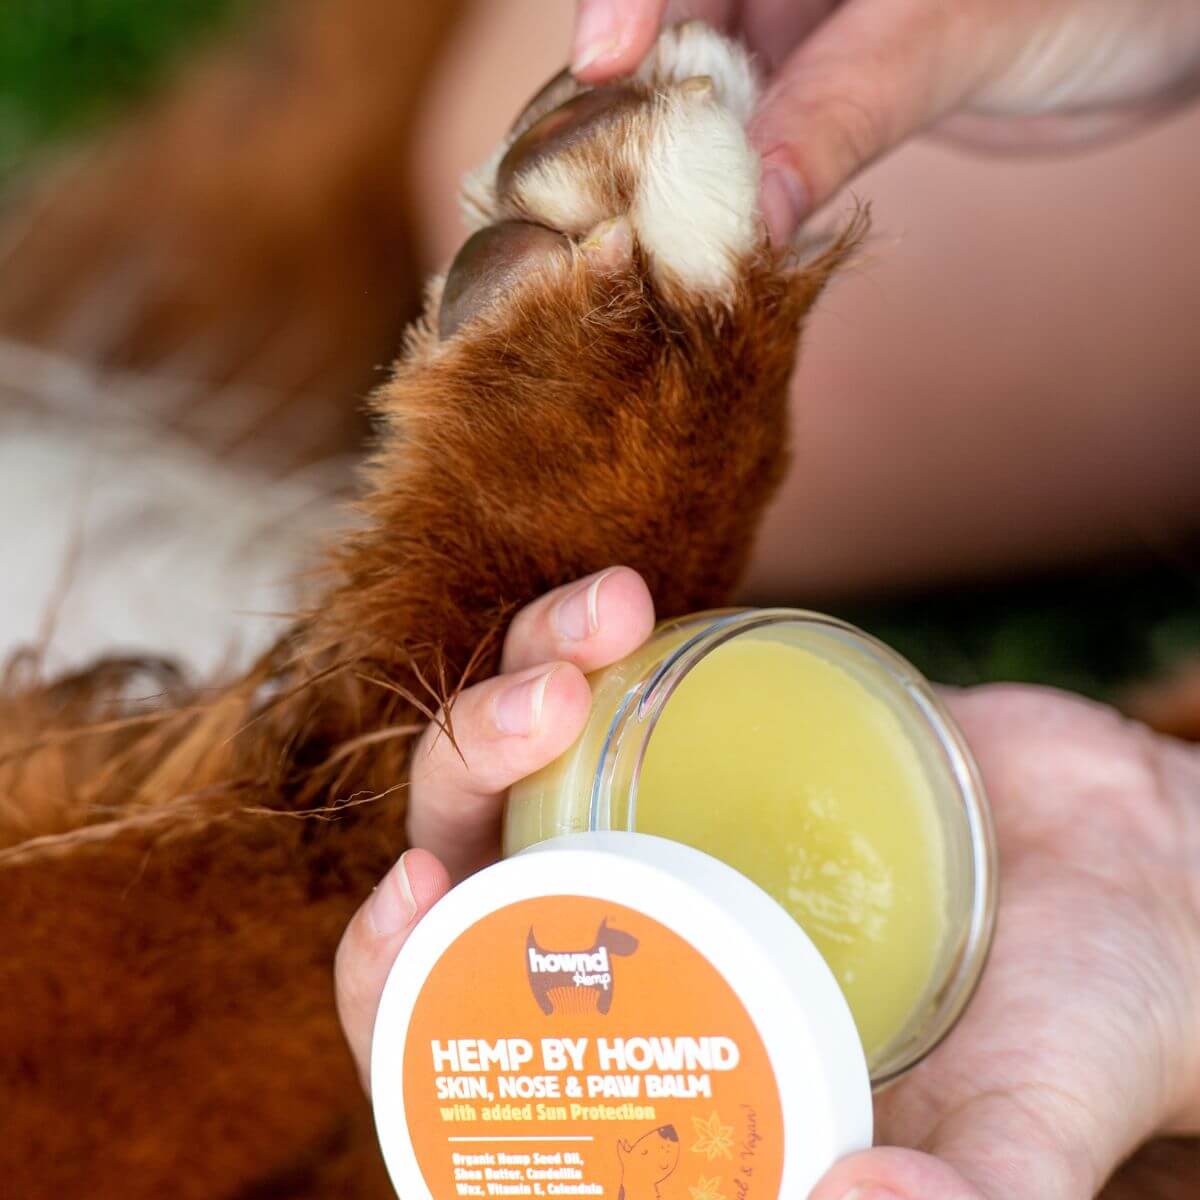 Hemp By Hownd Skin, Nose & Paw Balm With Sun Protection